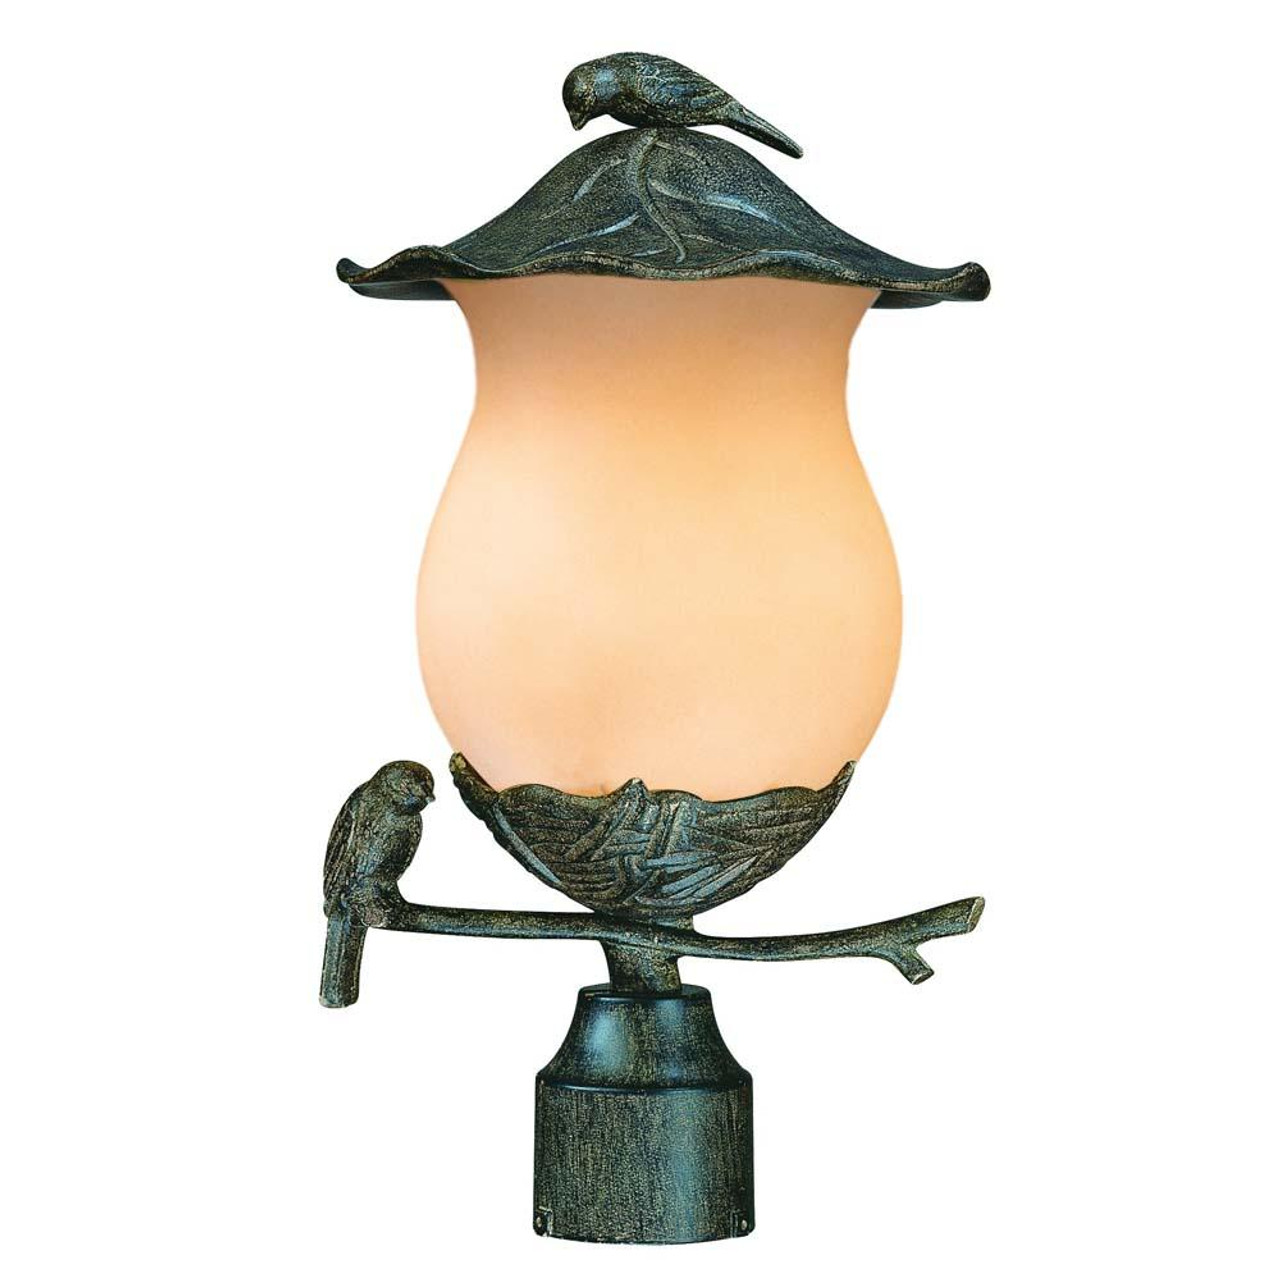 Acclaim 7517BC Lanai Collection 3-Light Post Mount Outdoor Light Fixture, Black Coral - 3